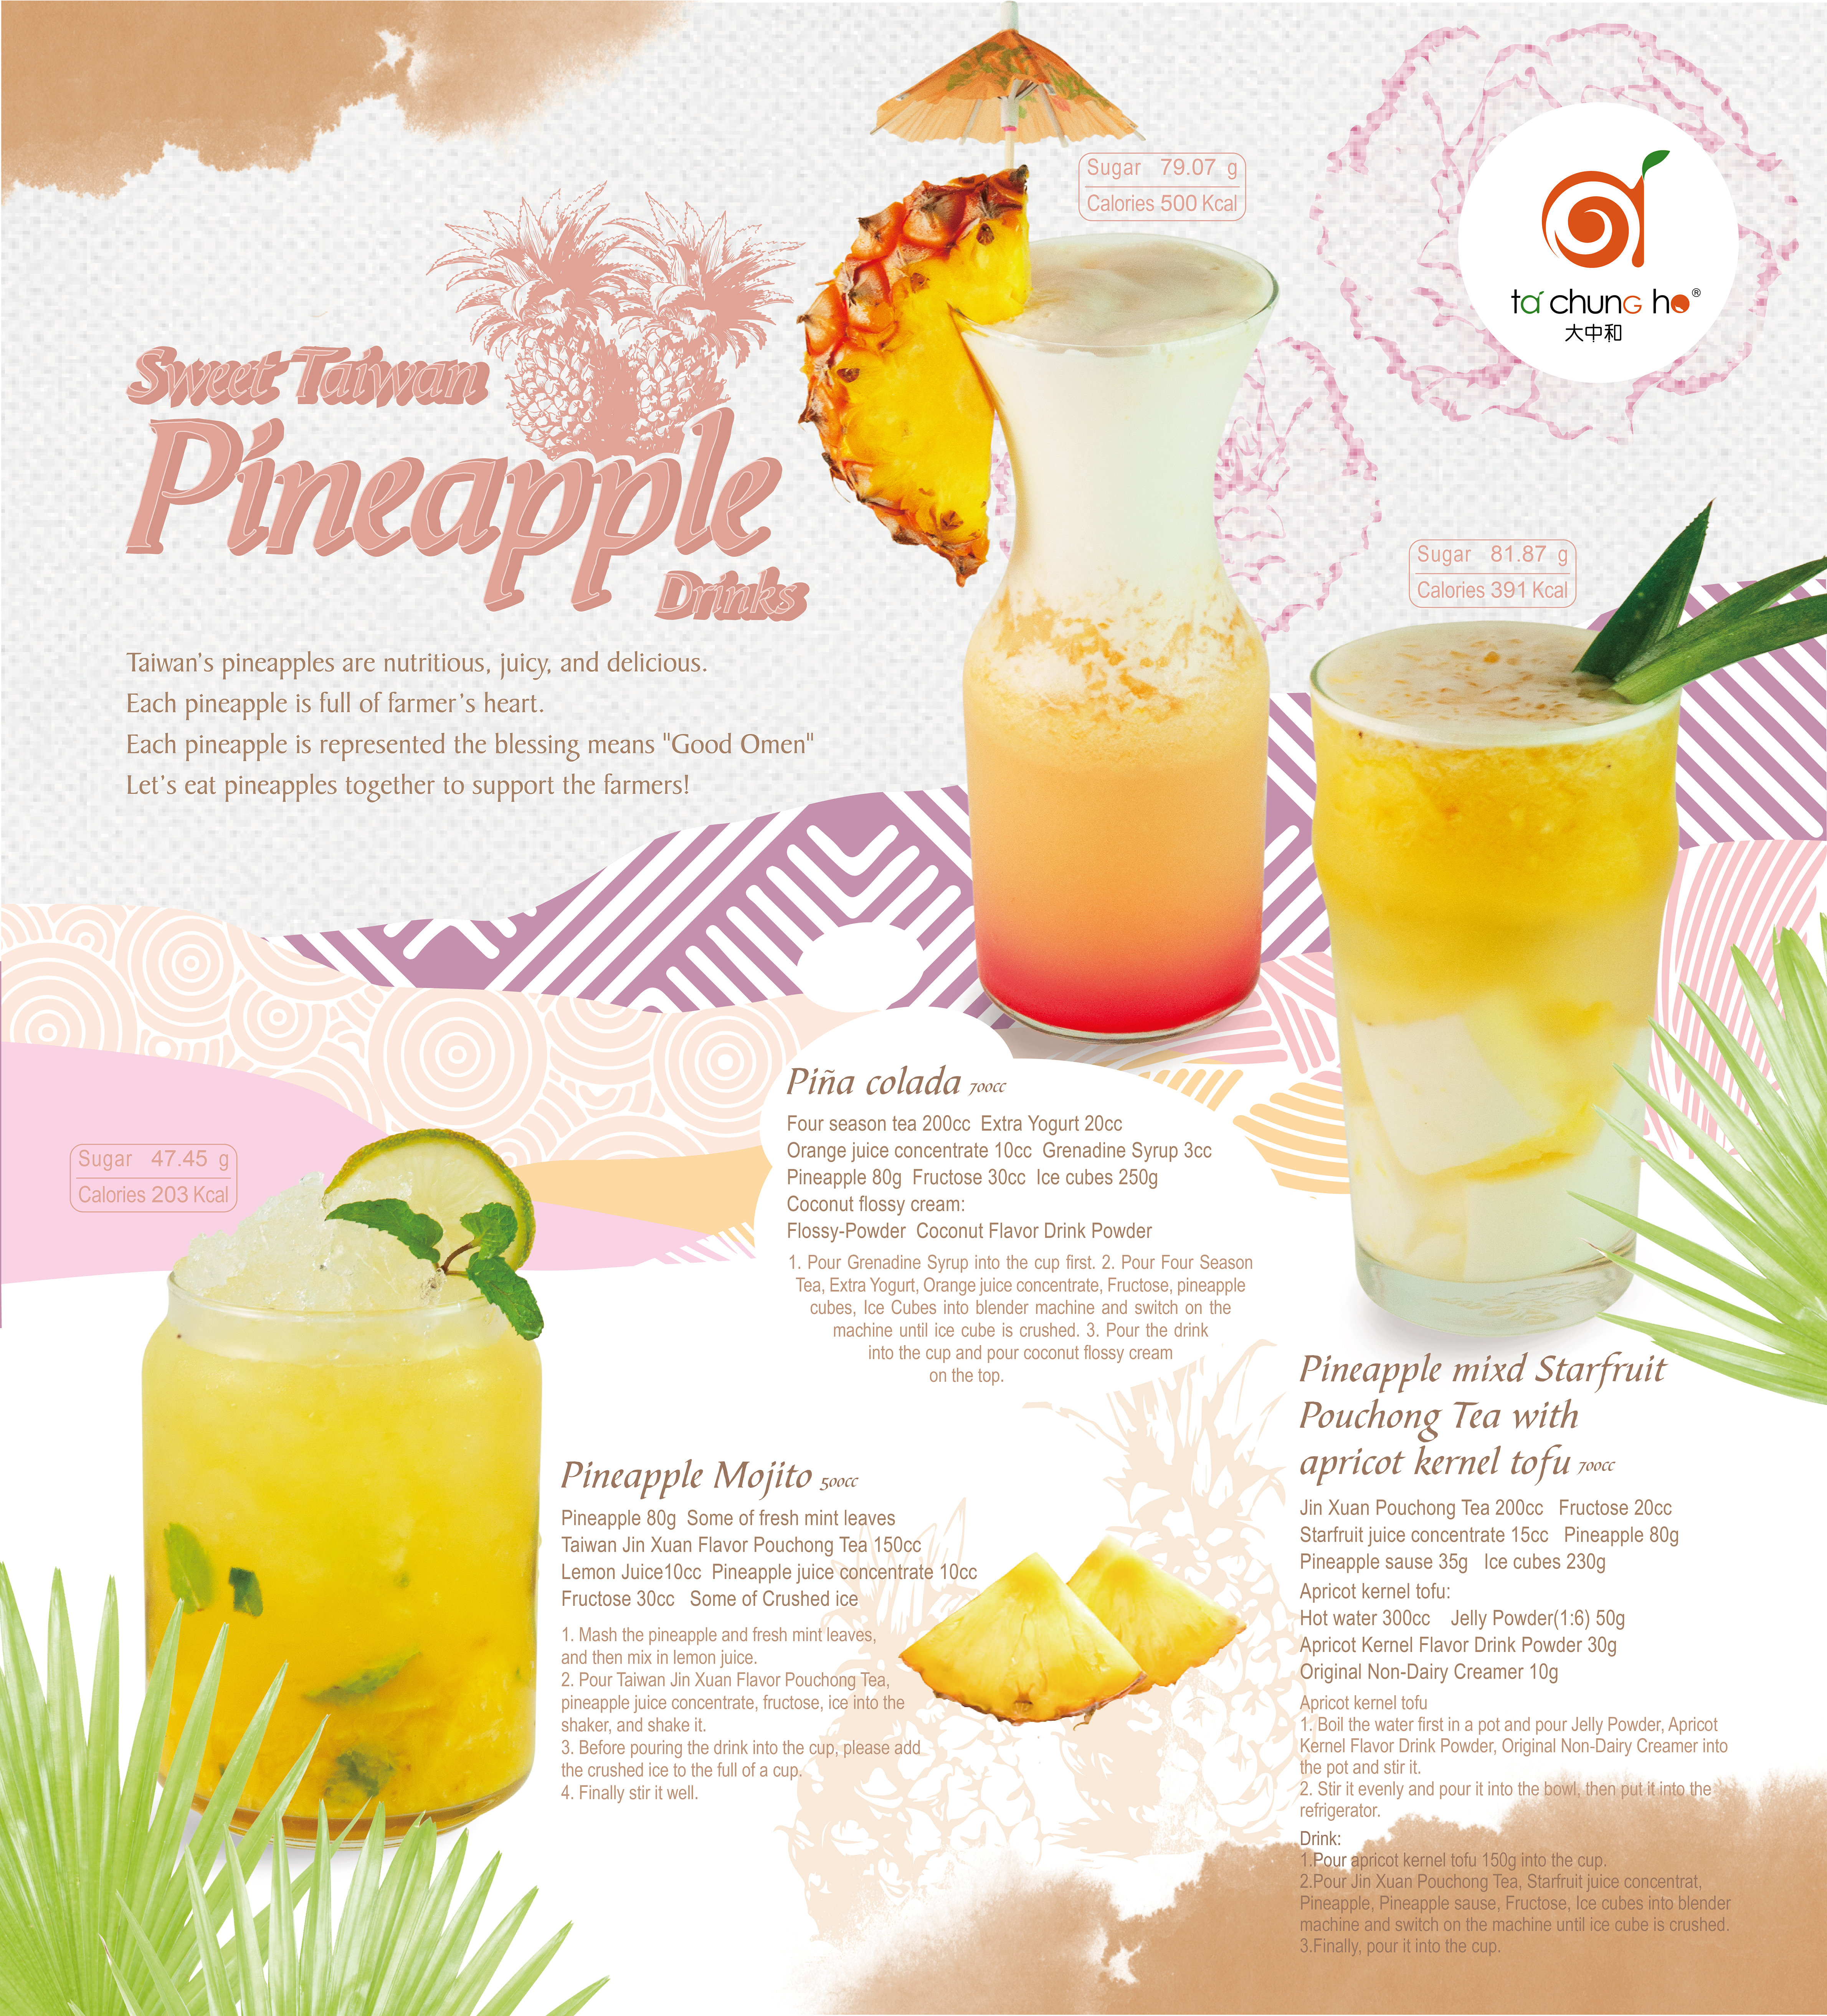 2021●Happy Mothers Day●Sweet Taiwan Pineapple Drinks - Mother's Day drink,Jelly Powder,pina colada,Four Season Tea,Non-Dairy Creamer,Flossy Powder,milktea